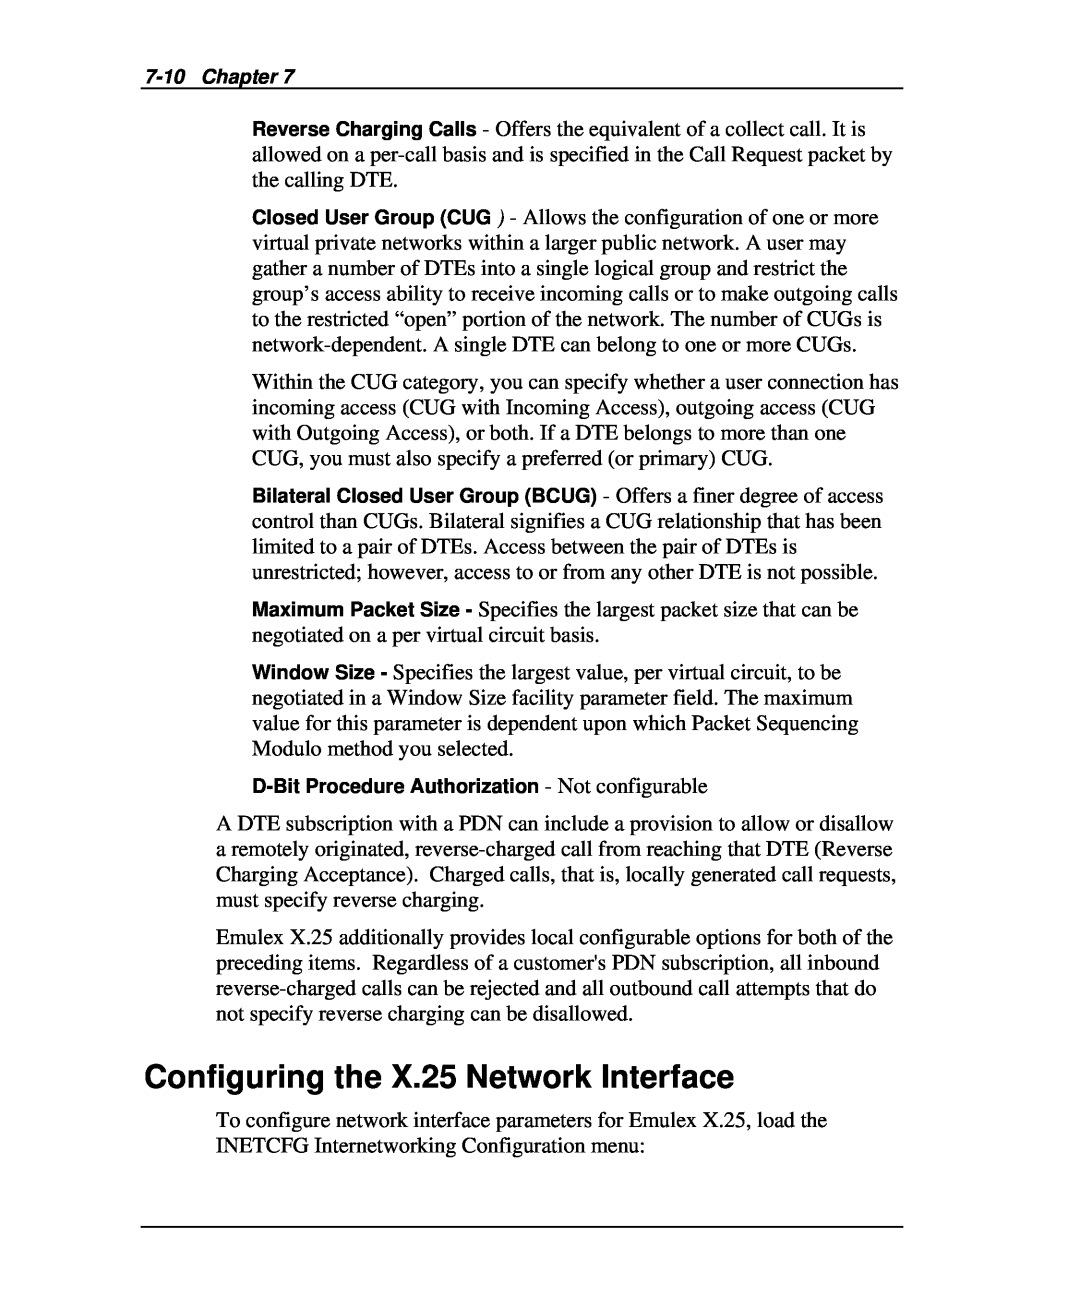 Emulex DCP_link manual Configuring the X.25 Network Interface, Chapter 